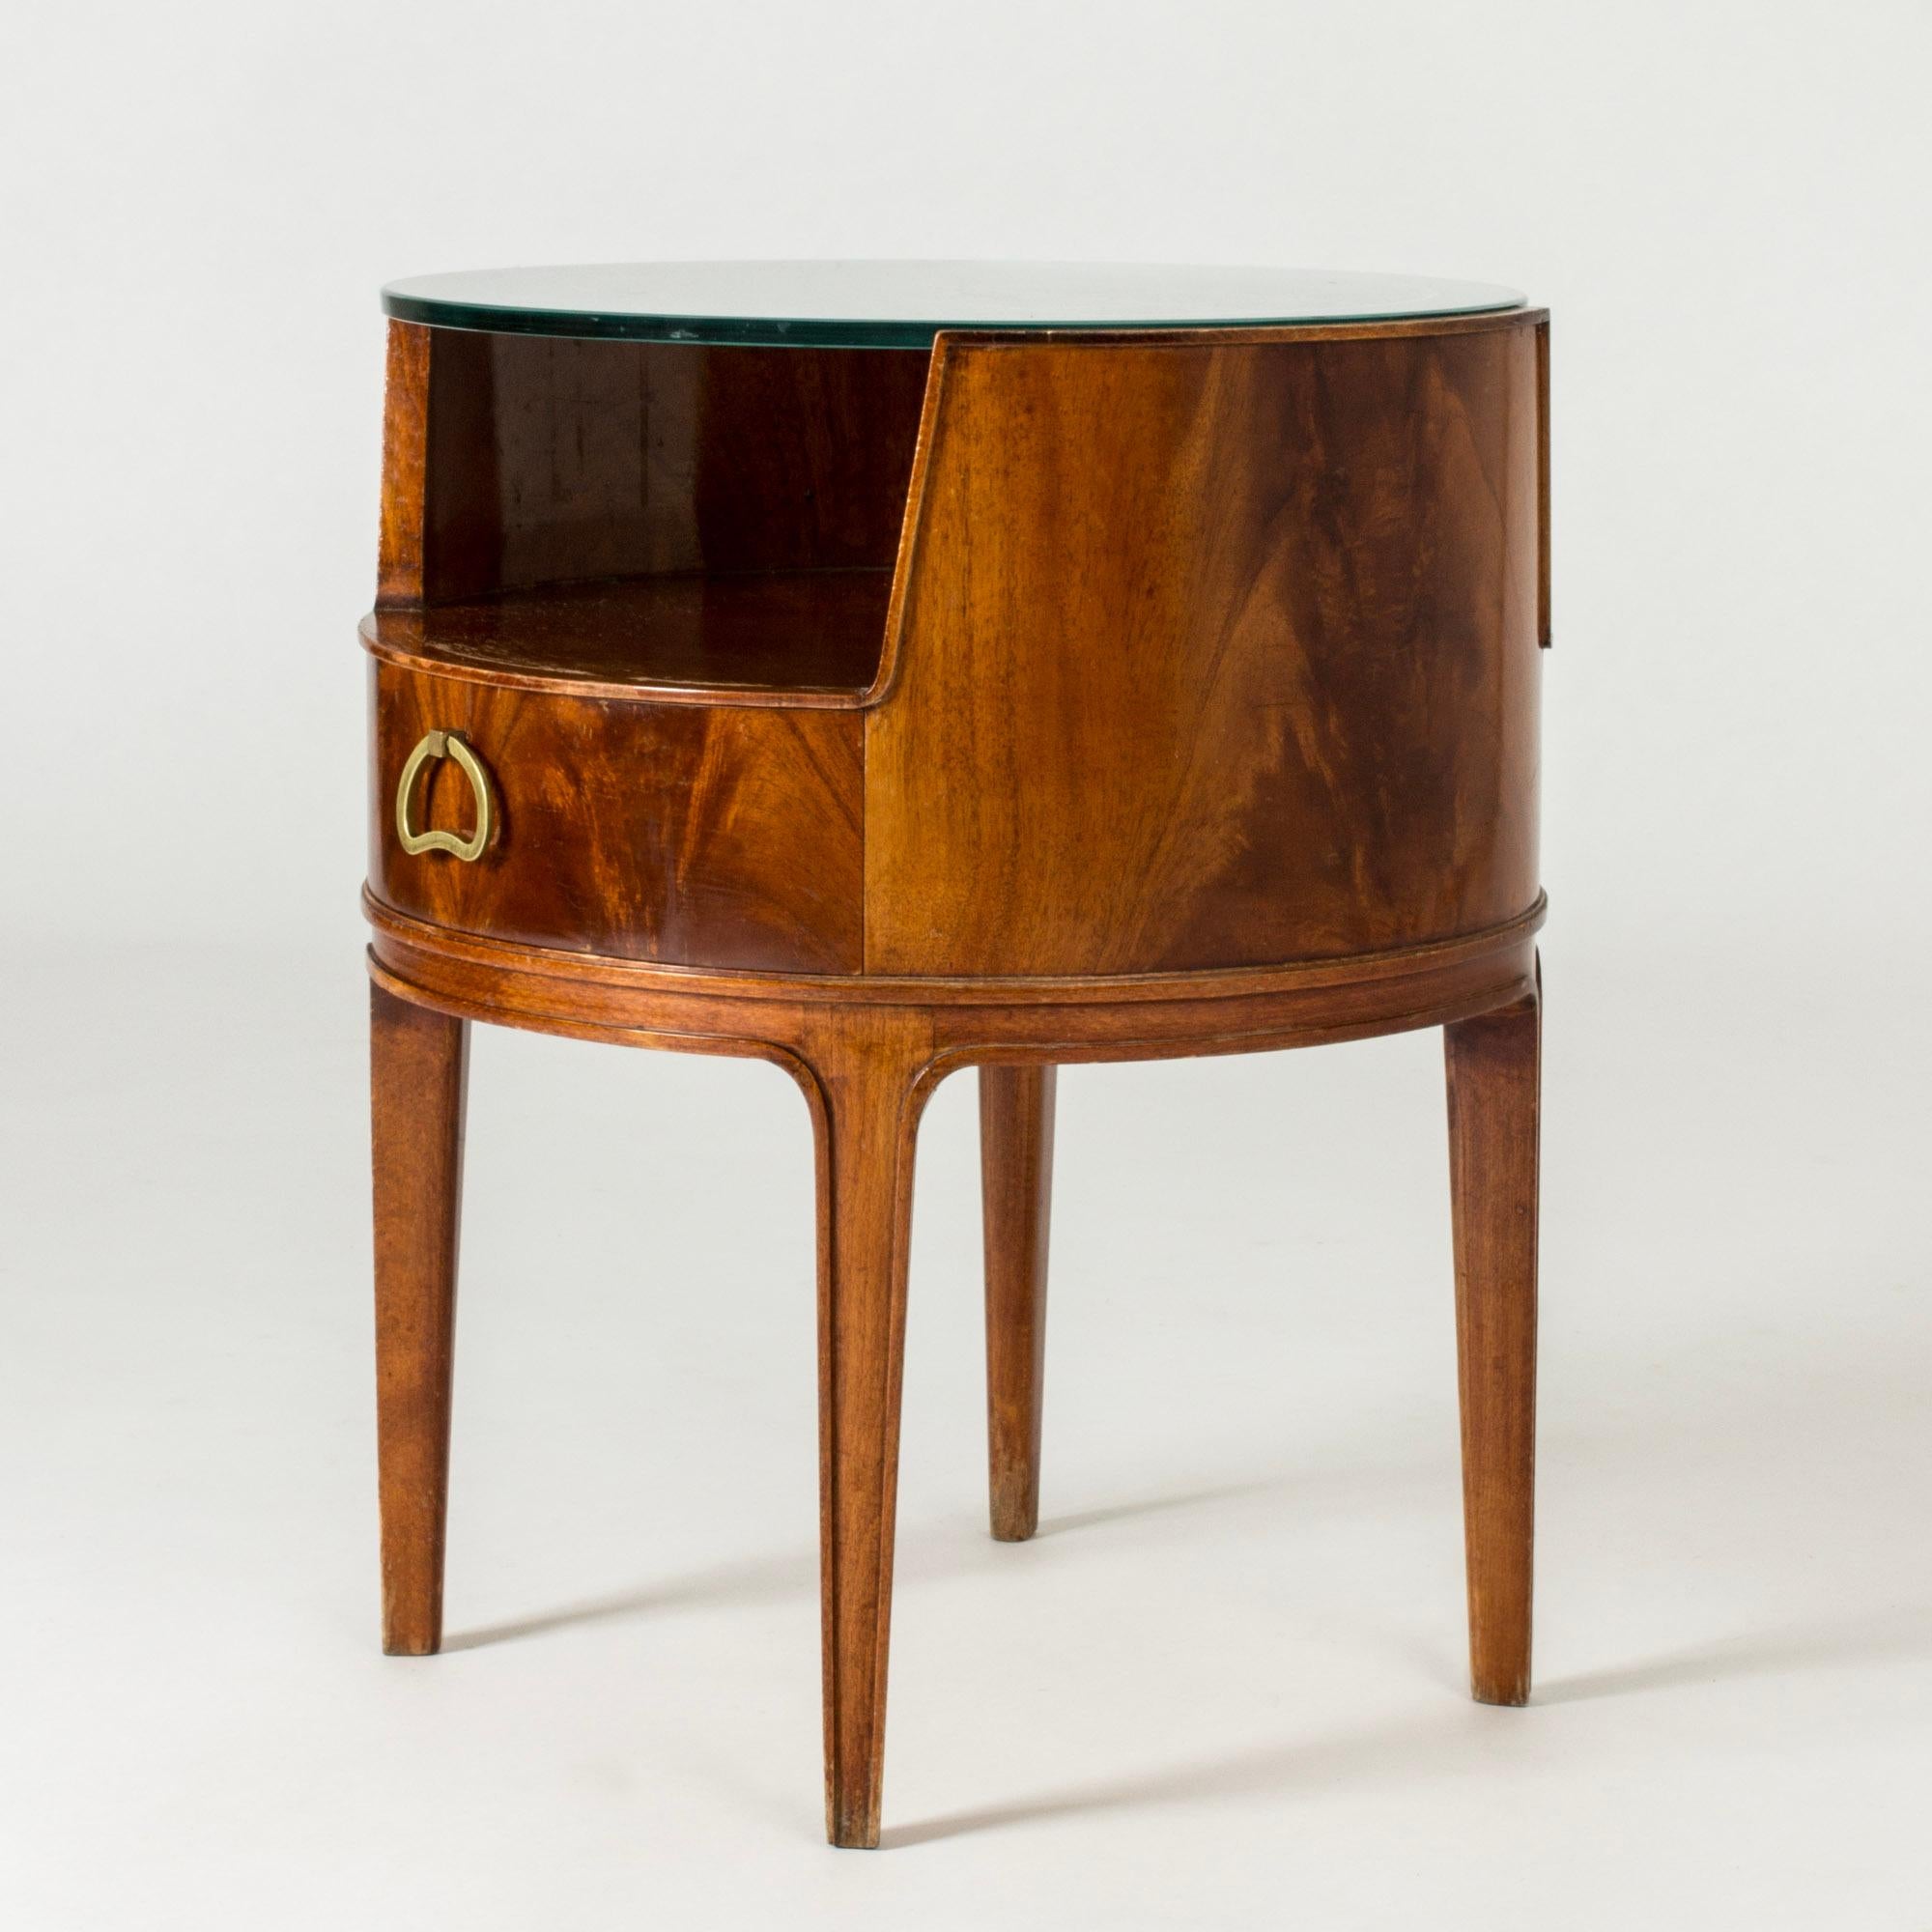 Mid-20th Century Midcentury Modern Mahogany Side Tables by Axel Larsson, Sweden, 1940s